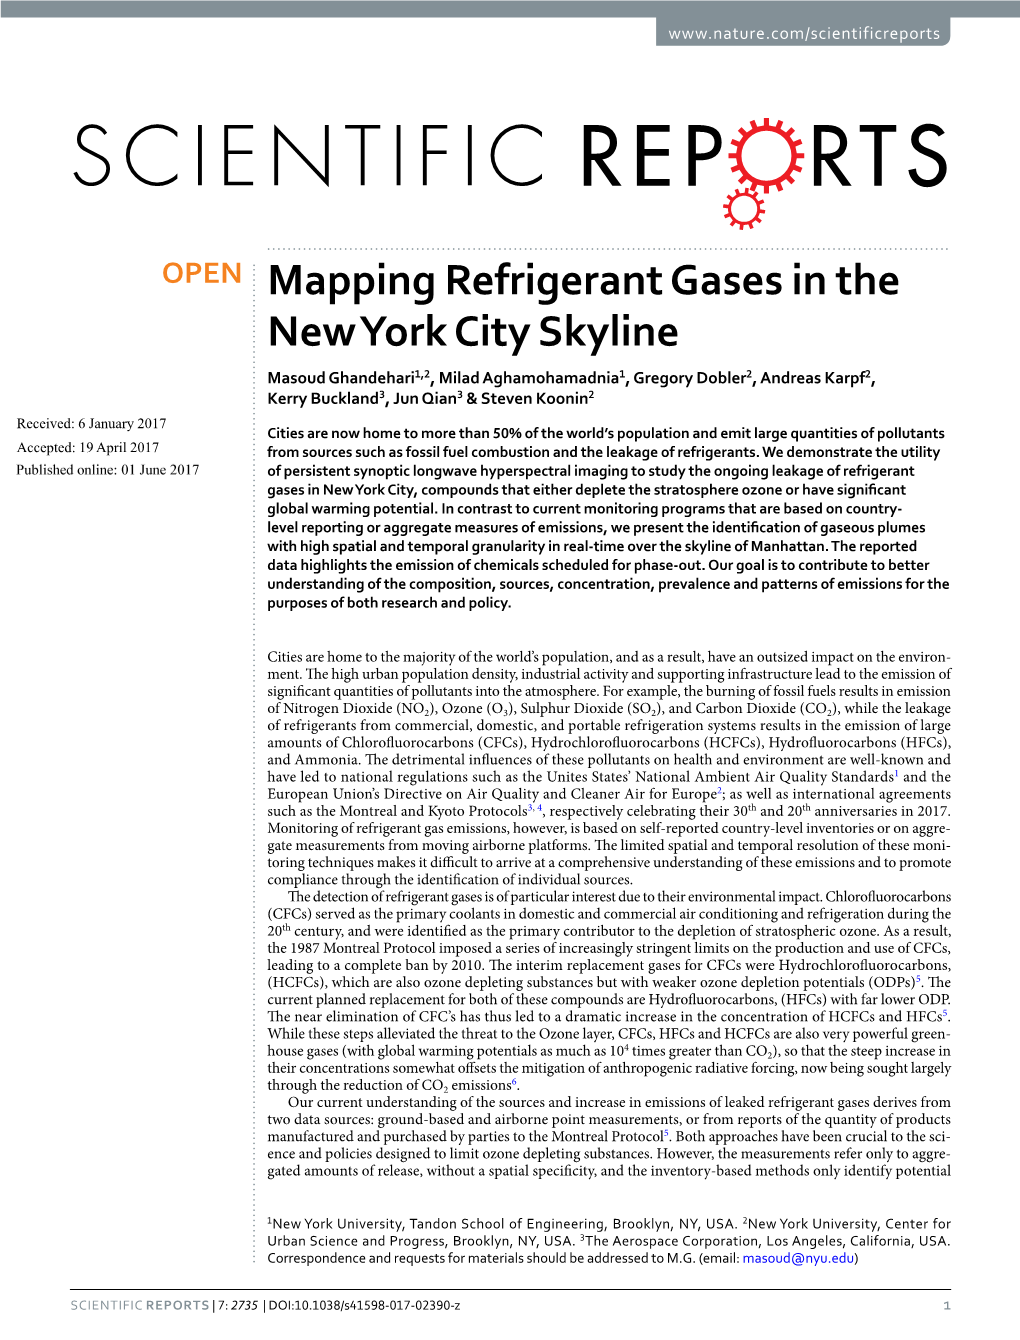 Mapping Refrigerant Gases in the New York City Skyline